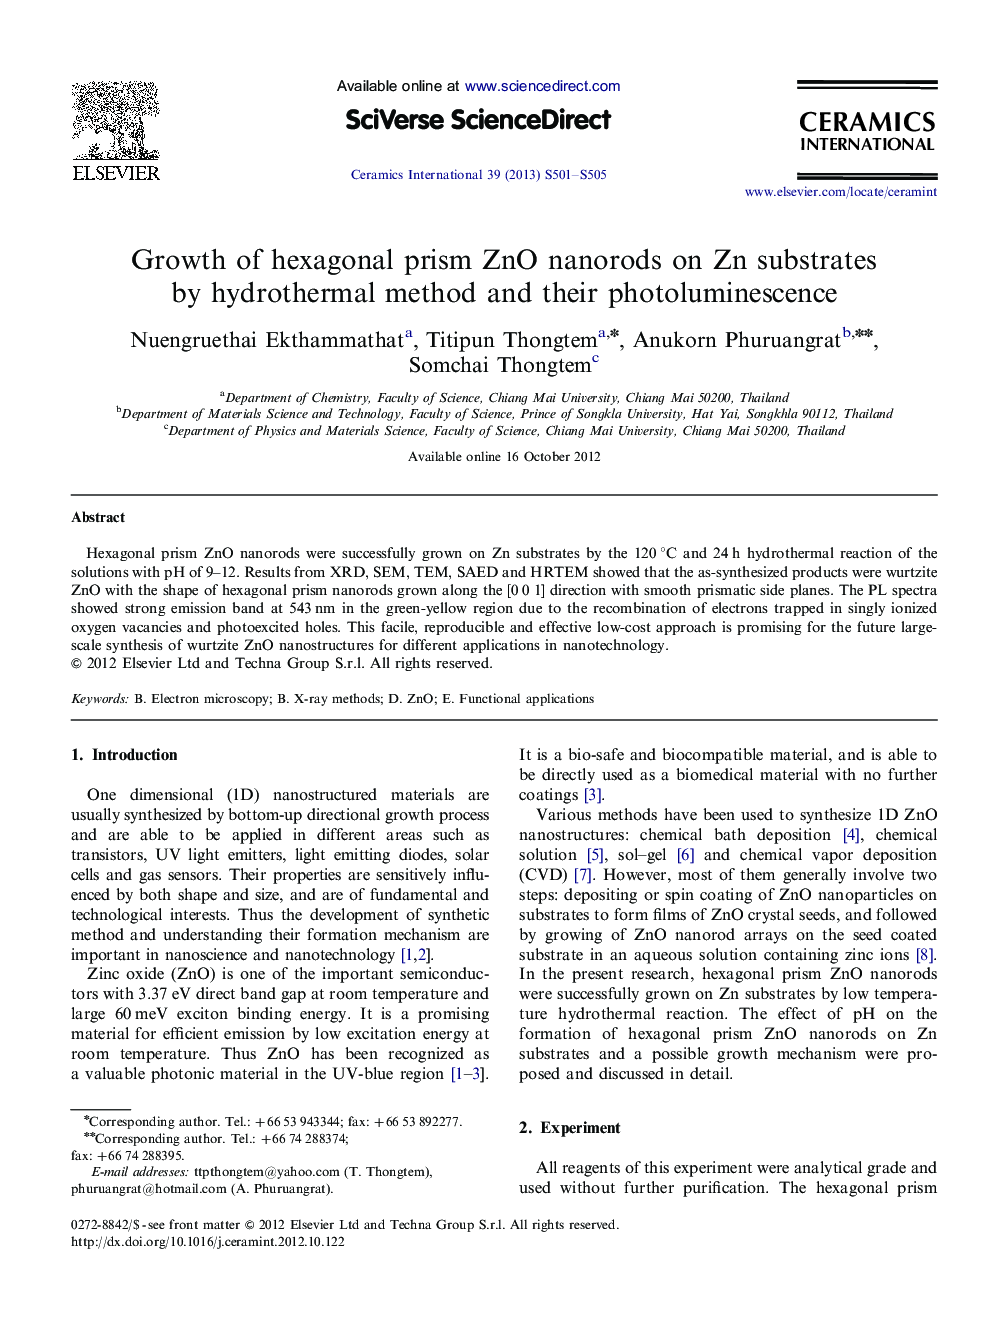 Growth of hexagonal prism ZnO nanorods on Zn substrates by hydrothermal method and their photoluminescence